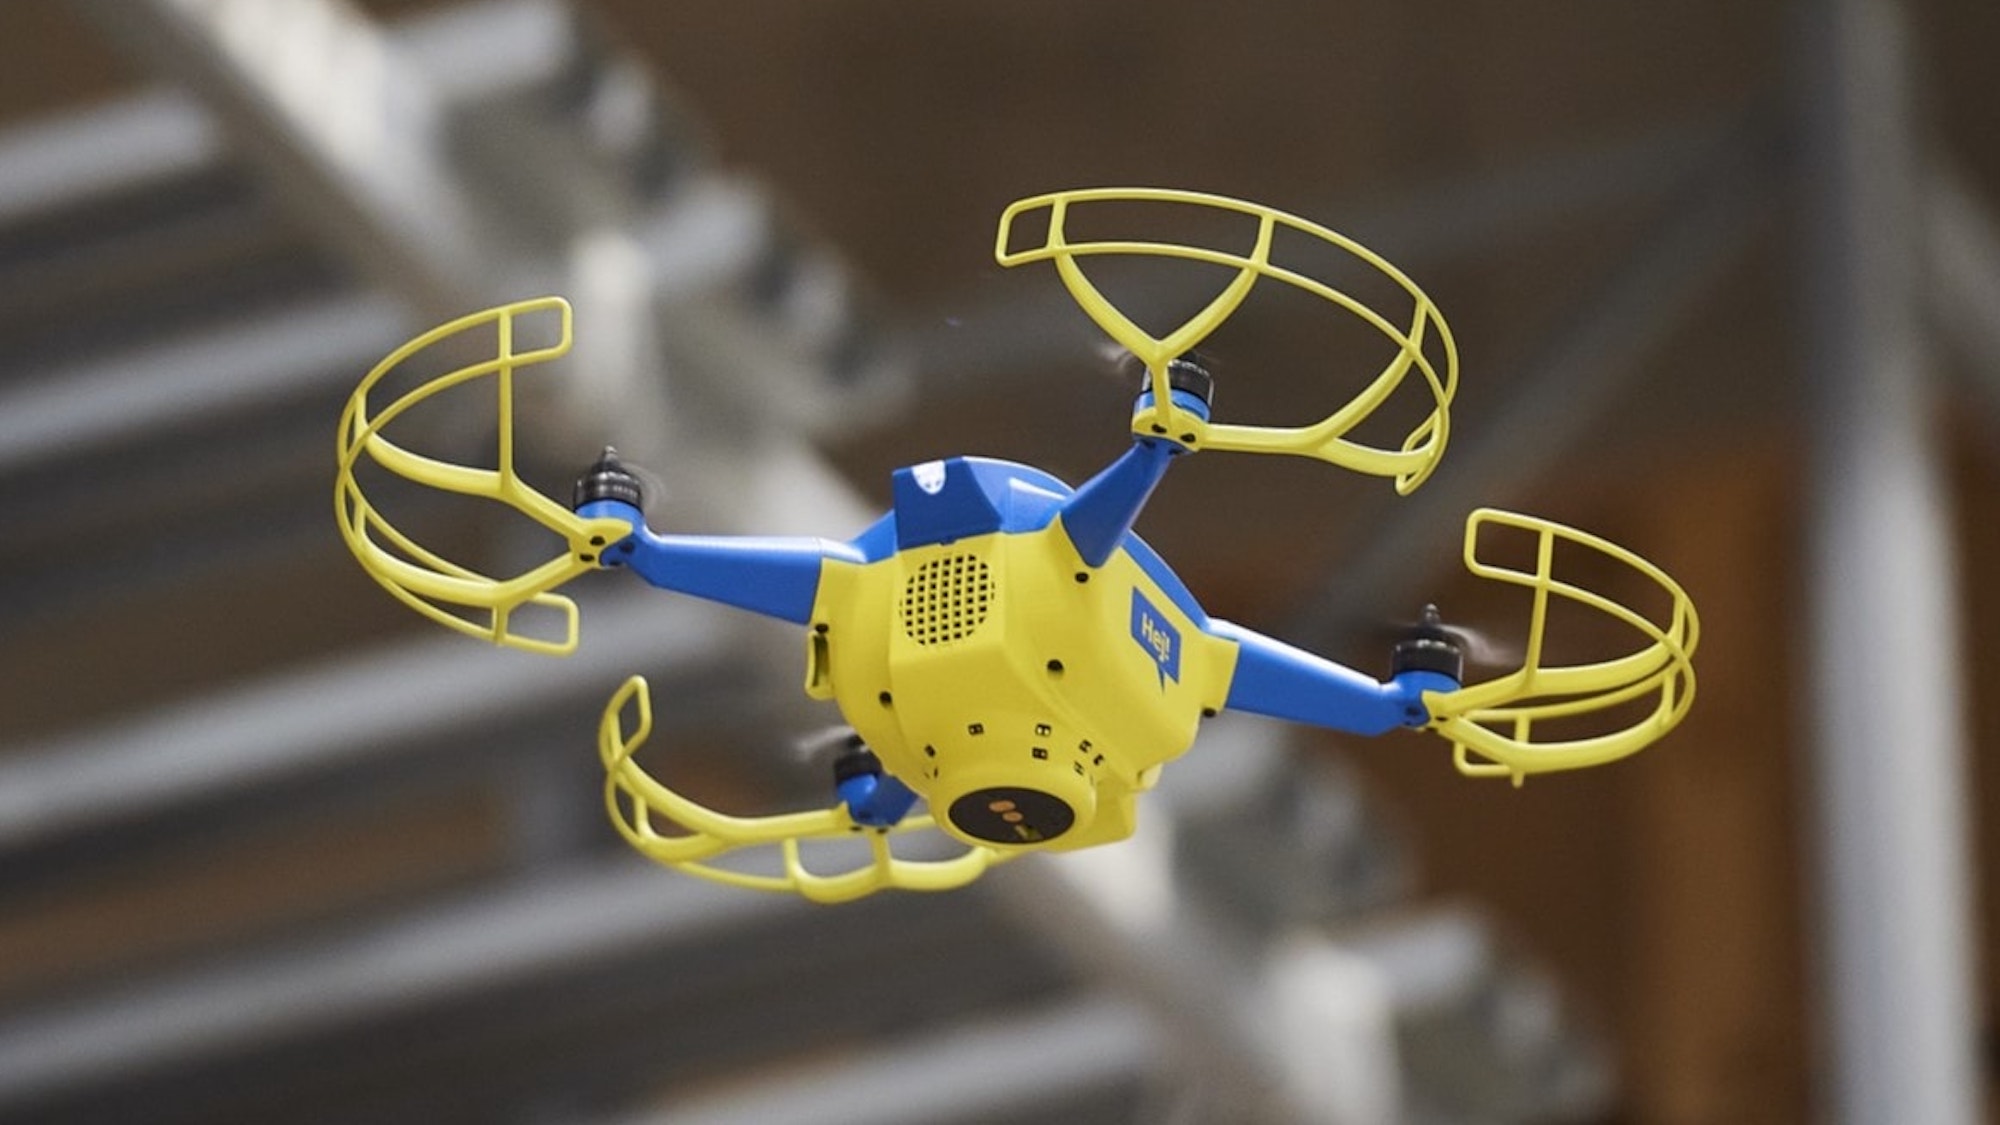 Ikea says 100 drones are now buzzing around its warehouses